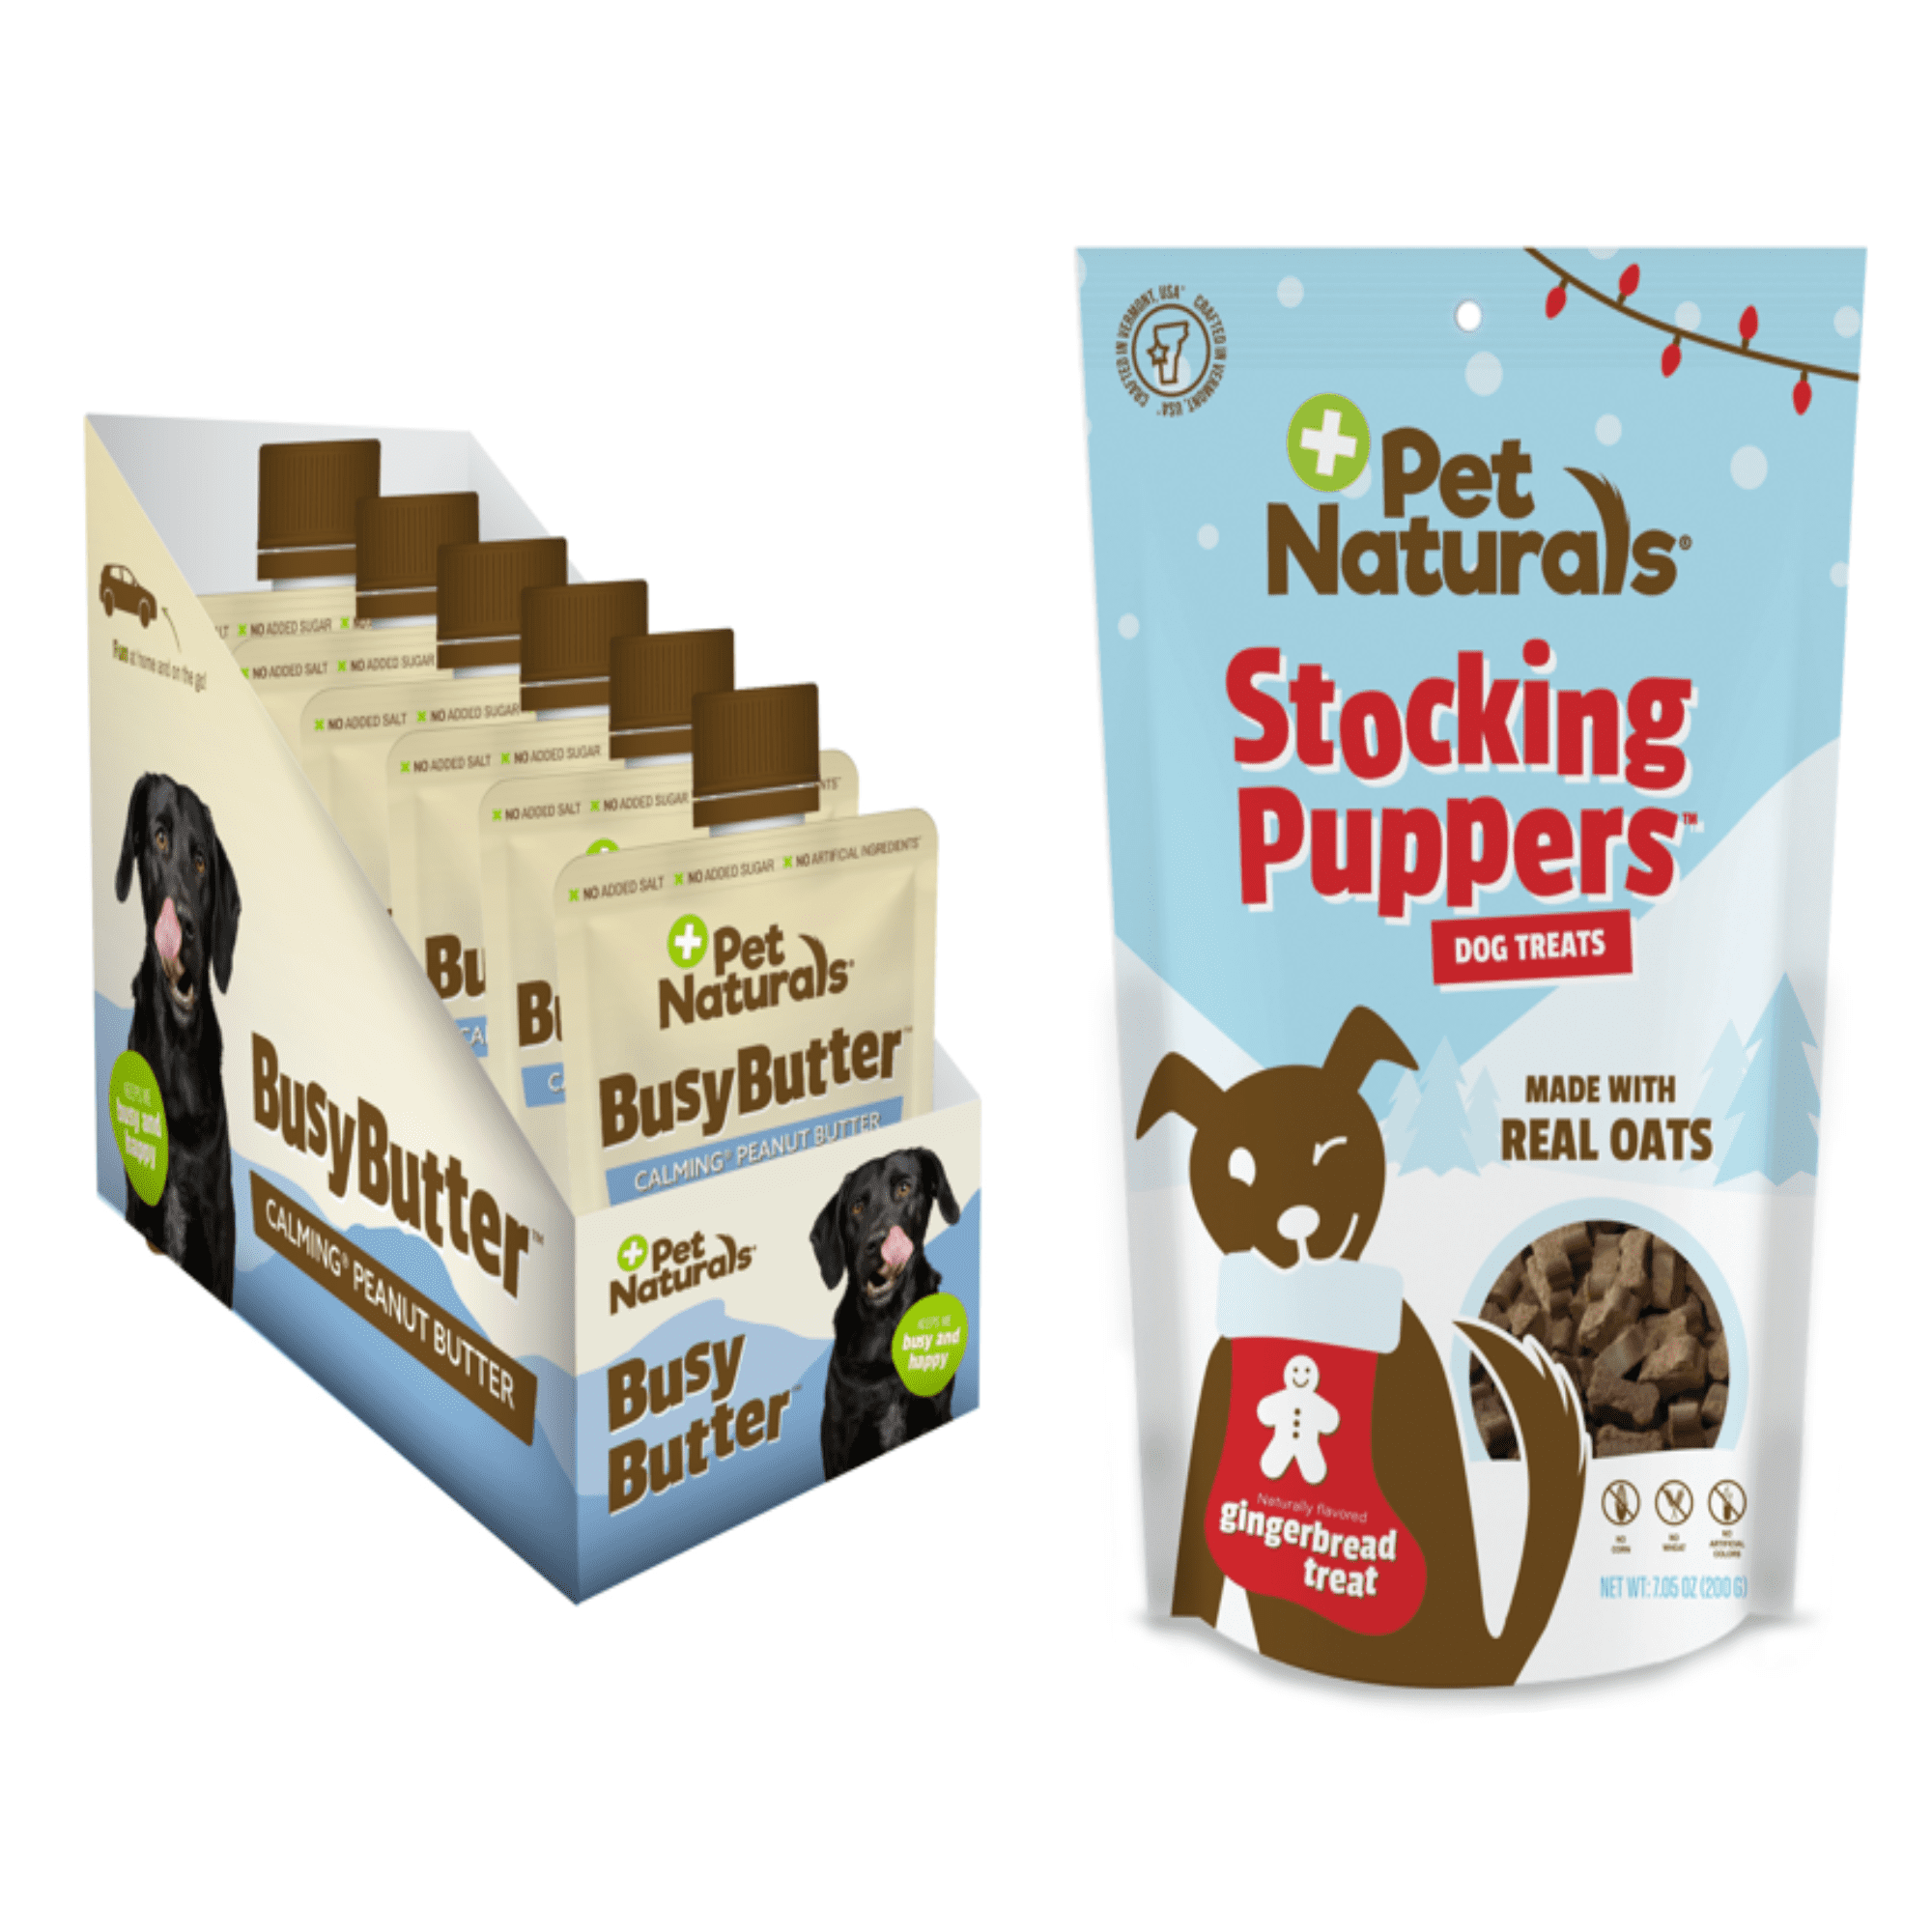  Pet Naturals BusyButter Easy Squeeze Calming Peanut Butter for  Dogs, 6 Pouches - Great for Treats, Lick Mats, Training, Calming, and  Occupier Toys : Pet Supplies